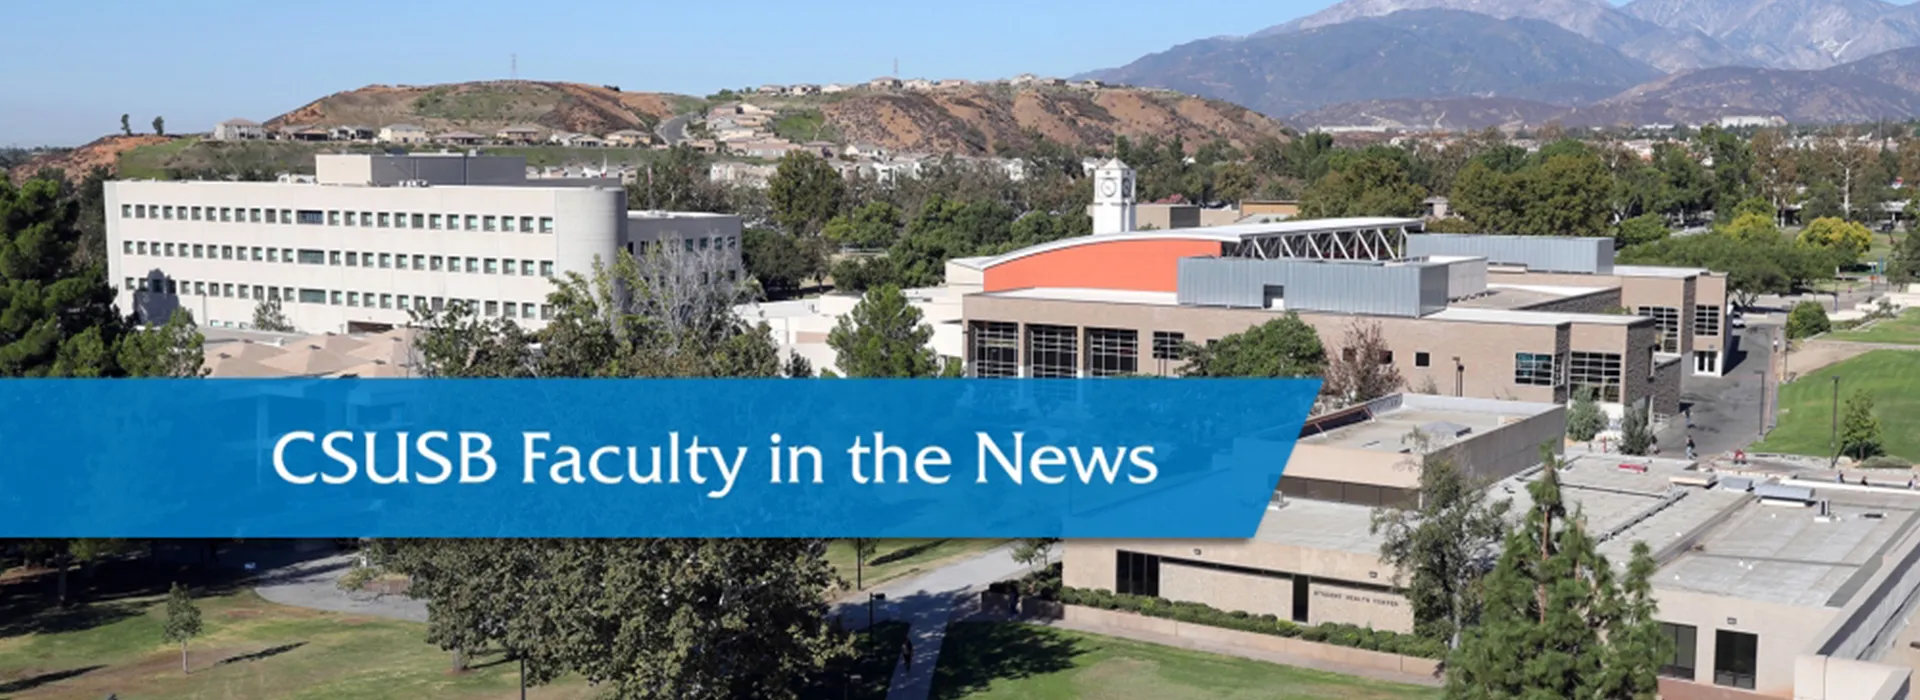 Faculty in the News logo